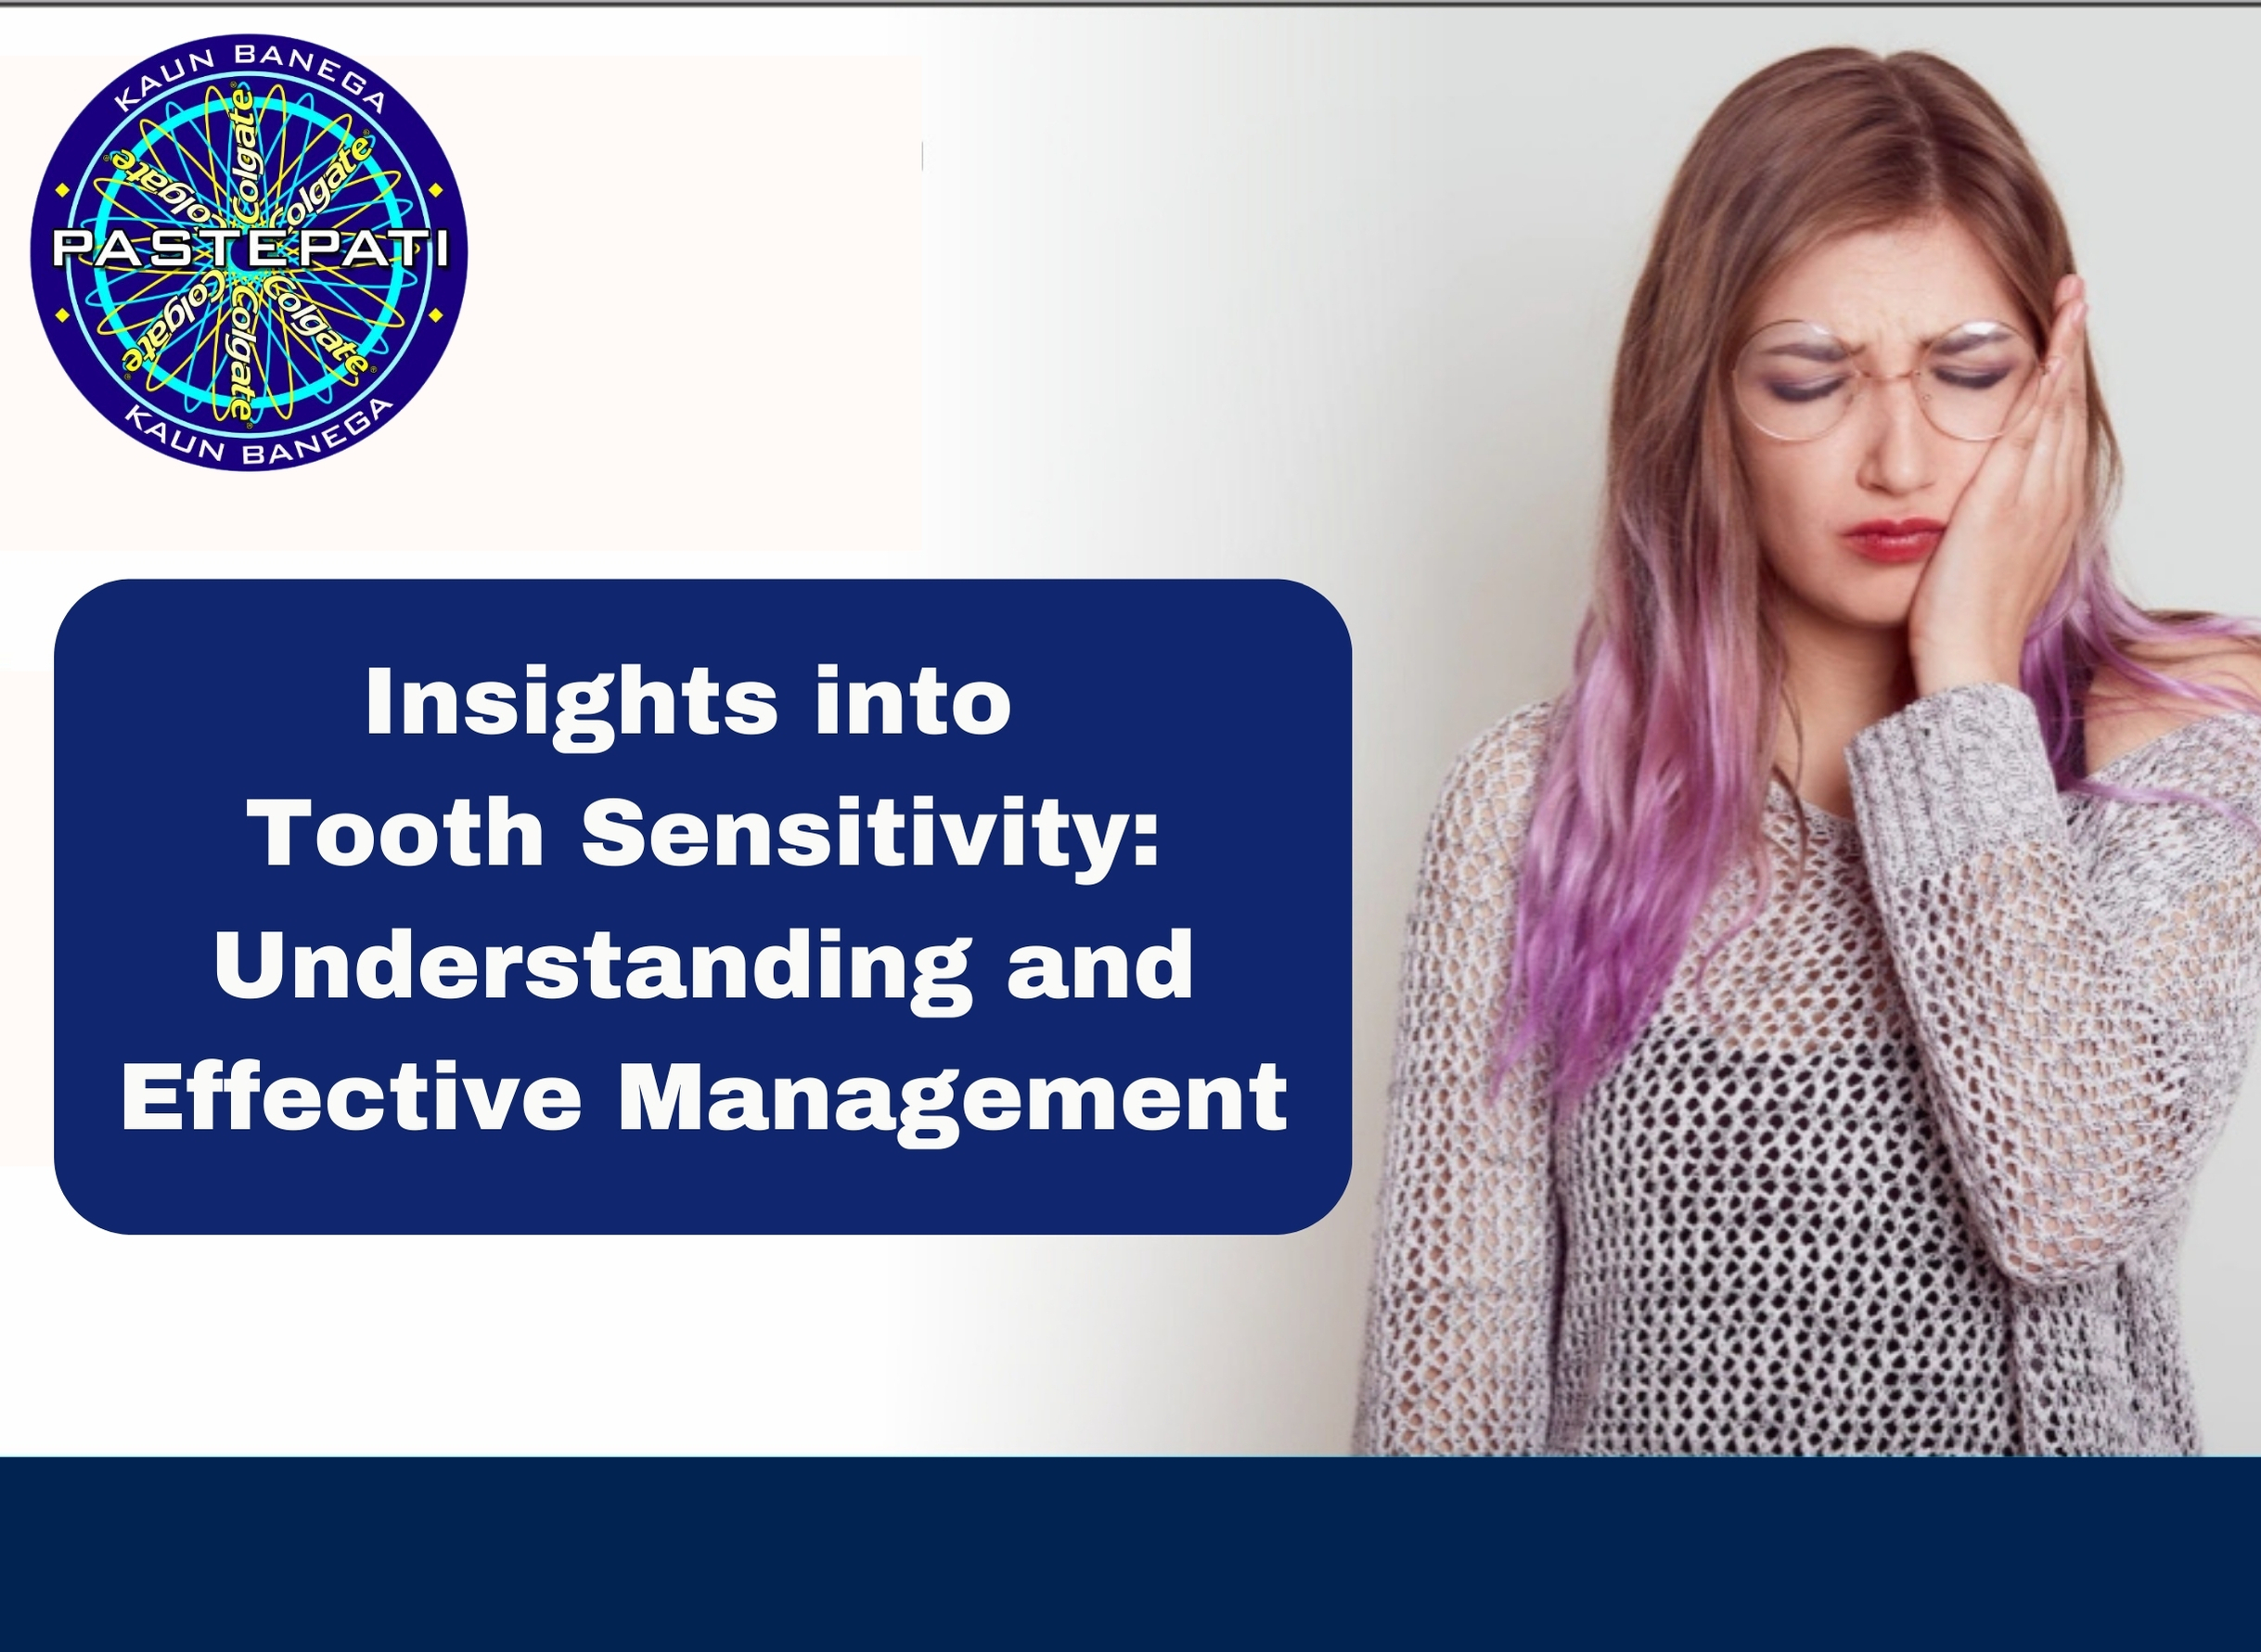 Insights into Tooth Sensitivity: Understanding and Effective Management